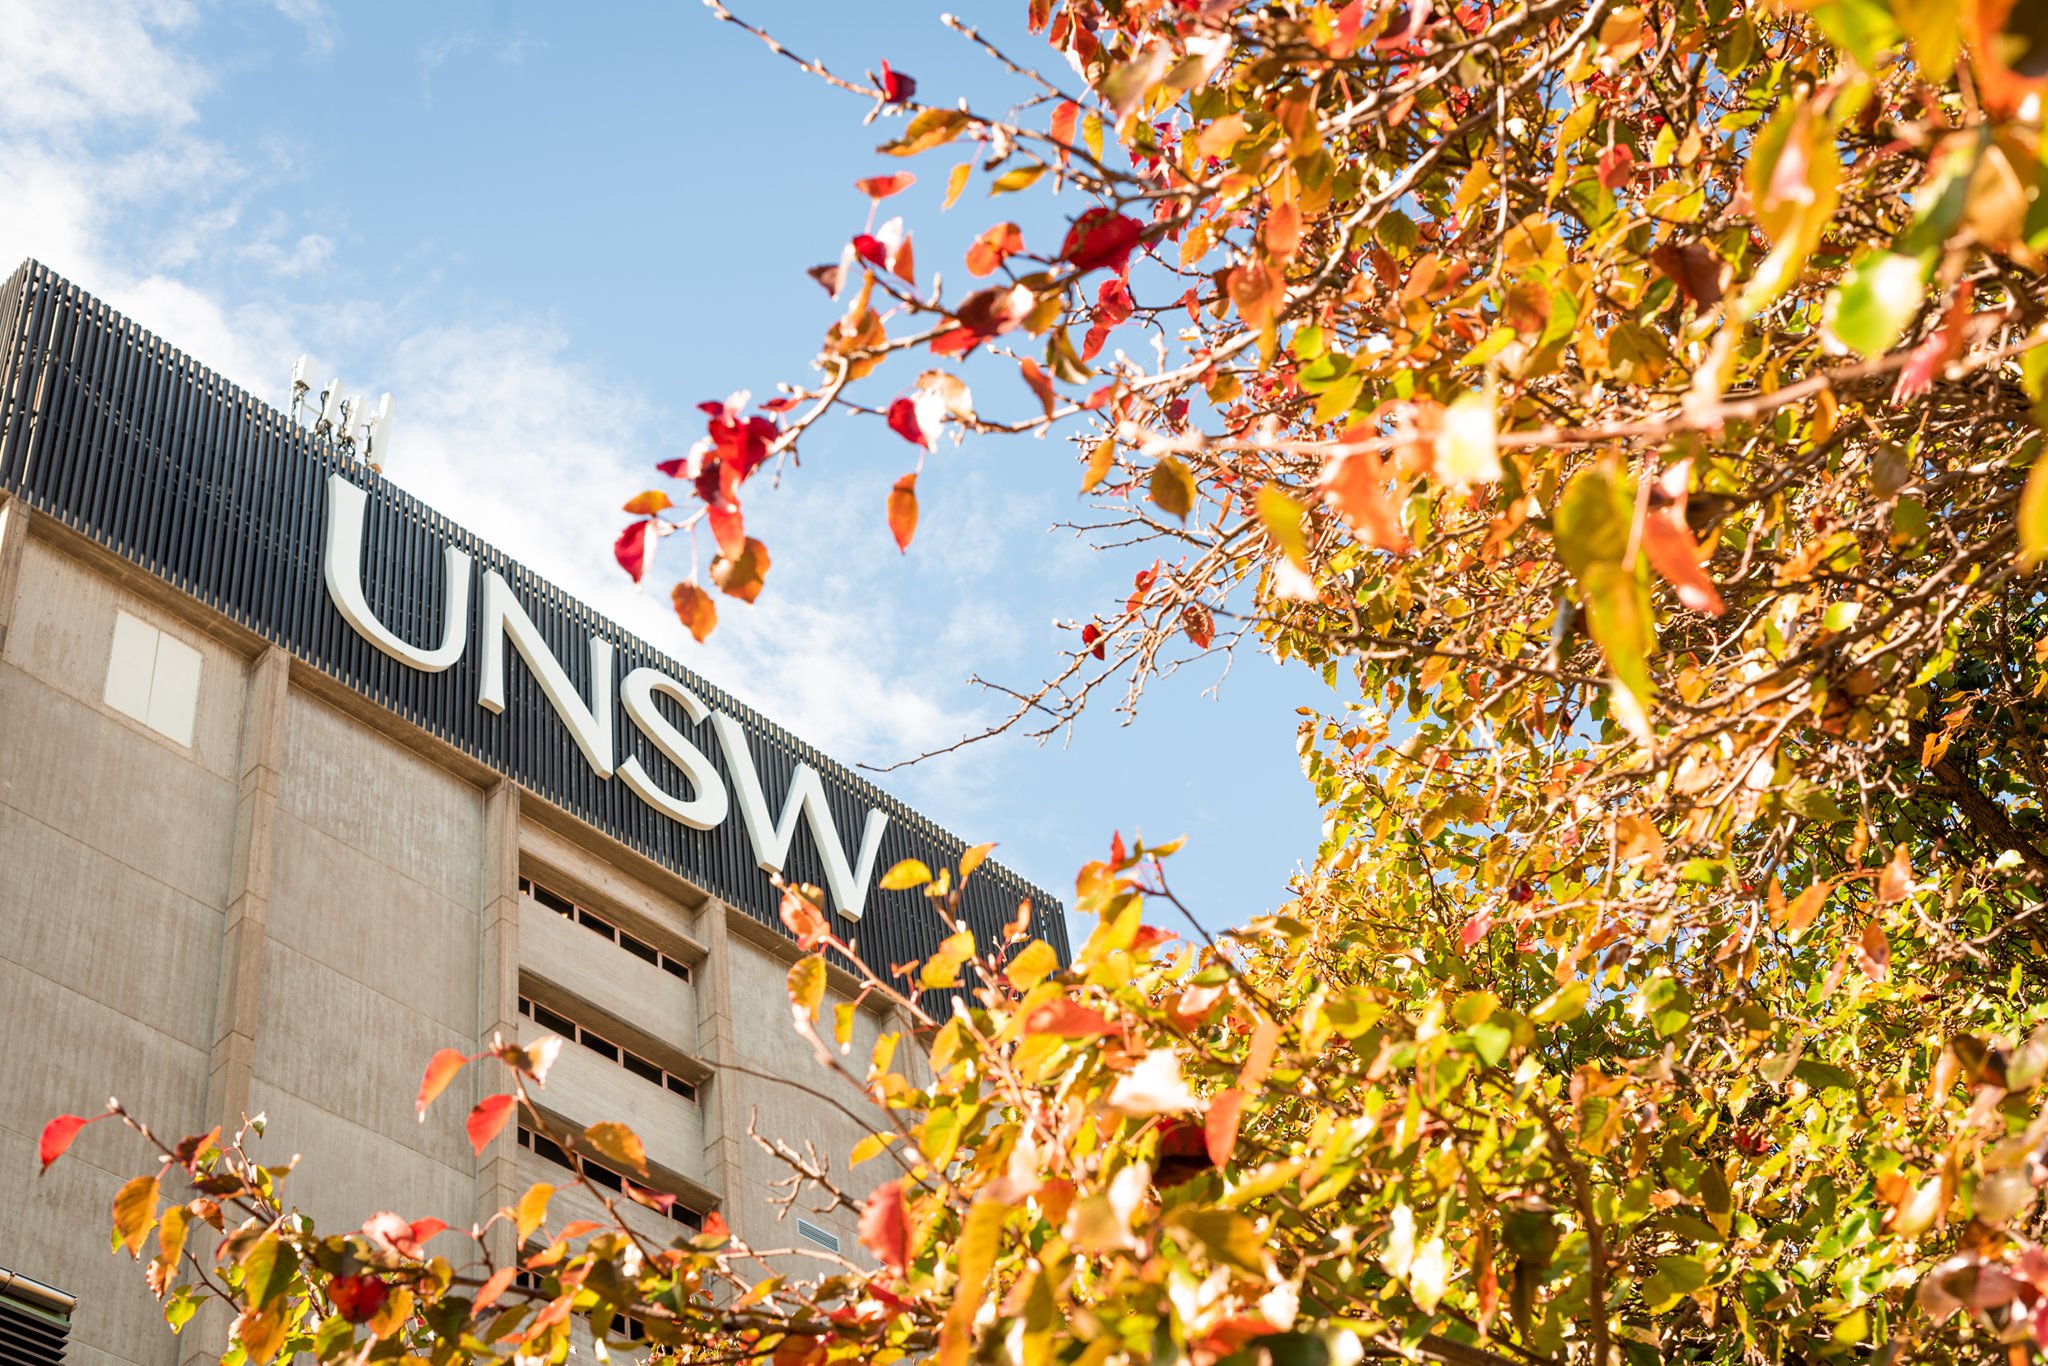 $549,000 Grant Awarded for ‘Cardiac AI: deep learning to predict and prevent secondary cardiovascular events’ Project at UNSW